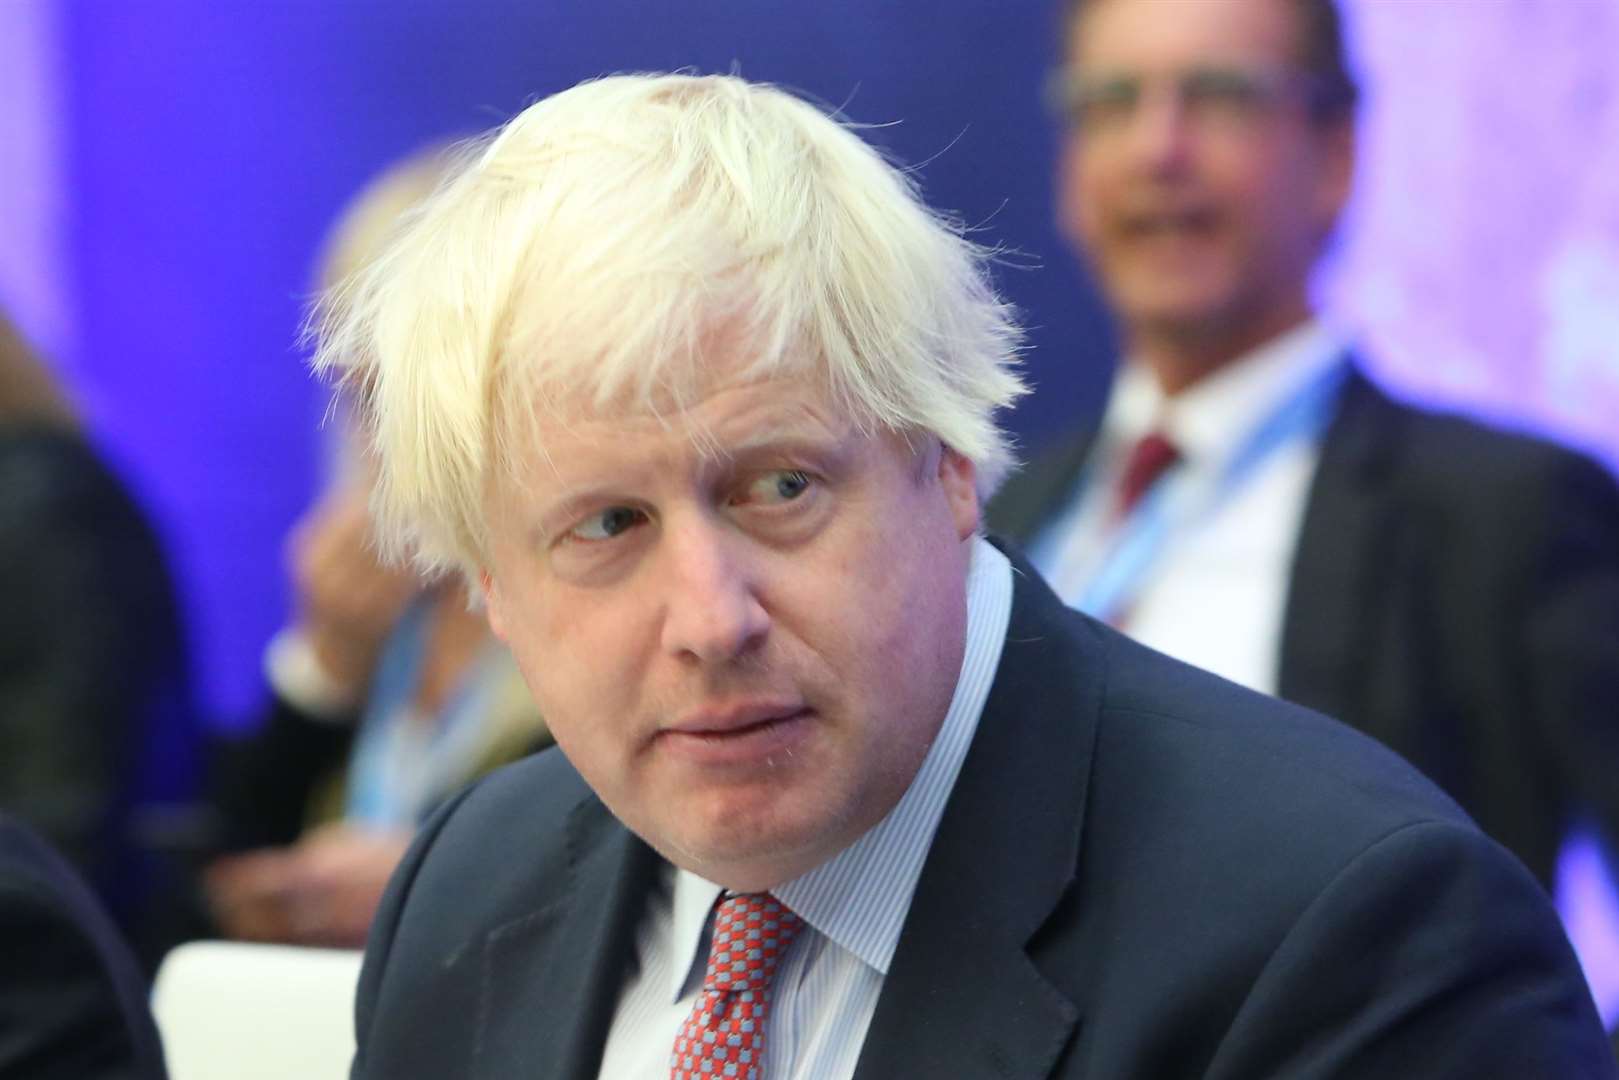 It is believed Boris Johnson could enter the race to return as Conservative Party leader